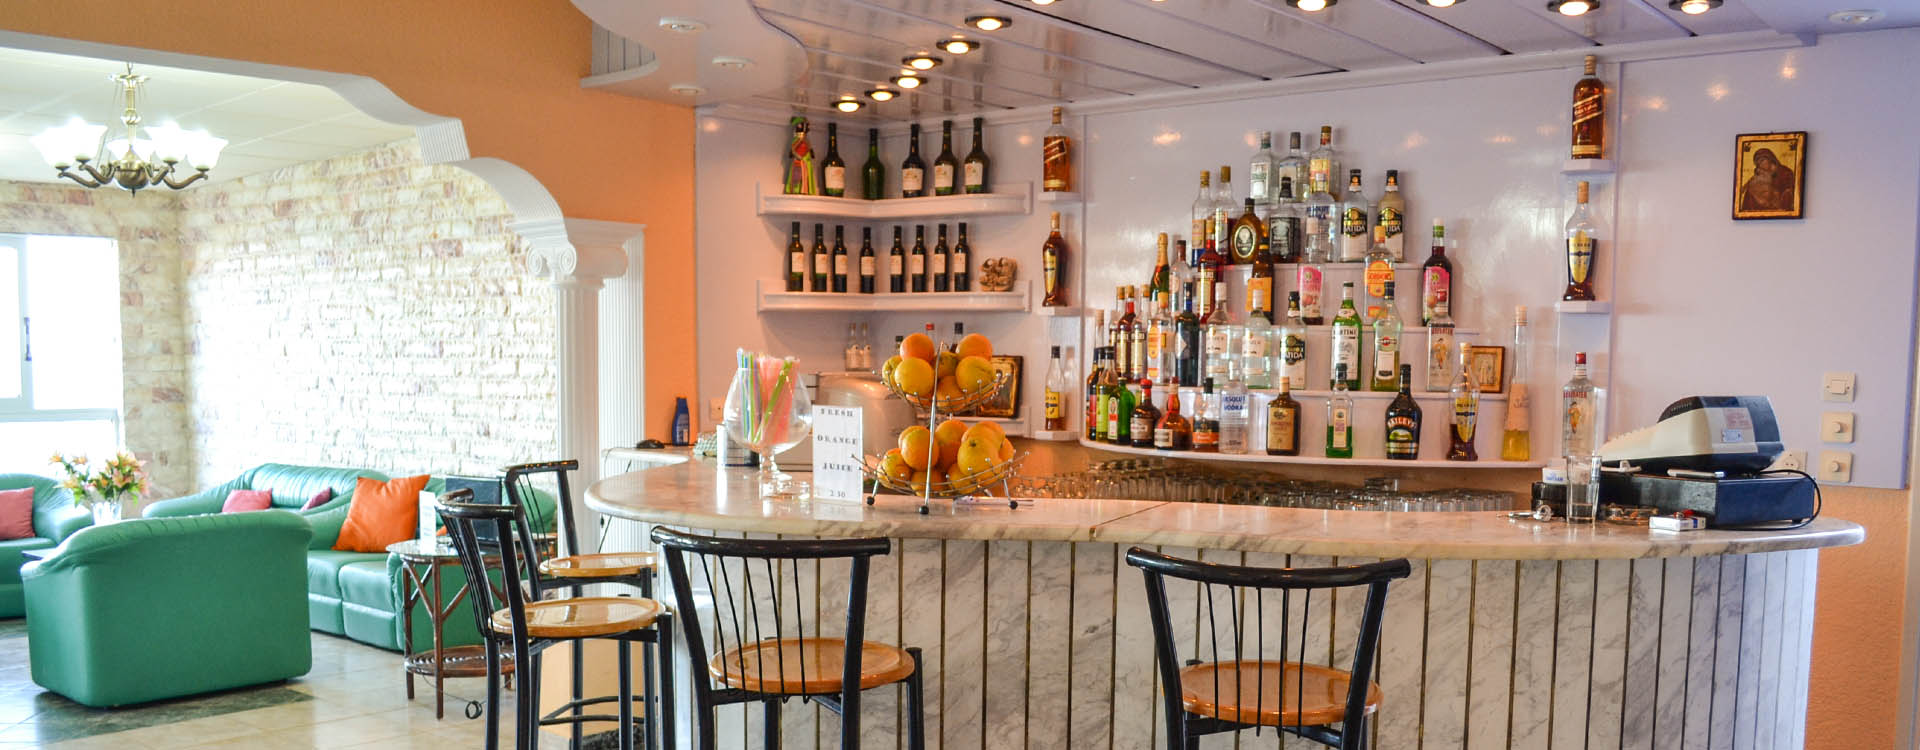 Enjoy coffee, drinks, cocktails and snacks at Castelia Bay indoors Bar